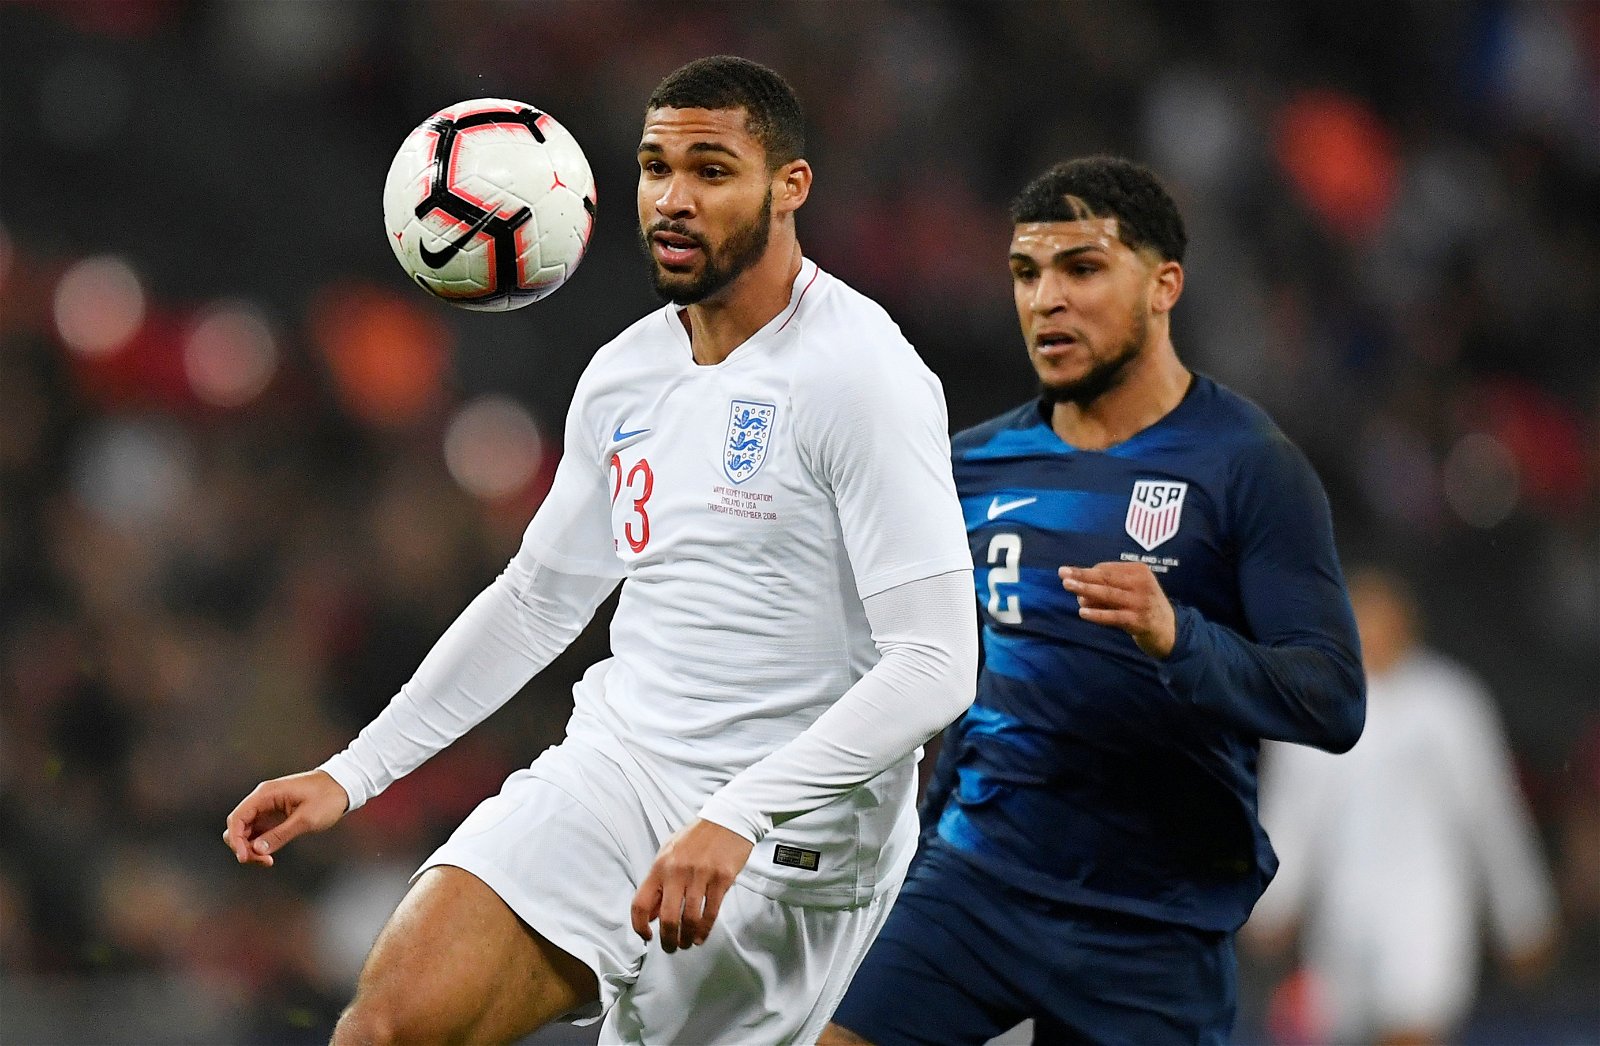 Loftus-Cheek will ask Chelsea allow him to leave in January